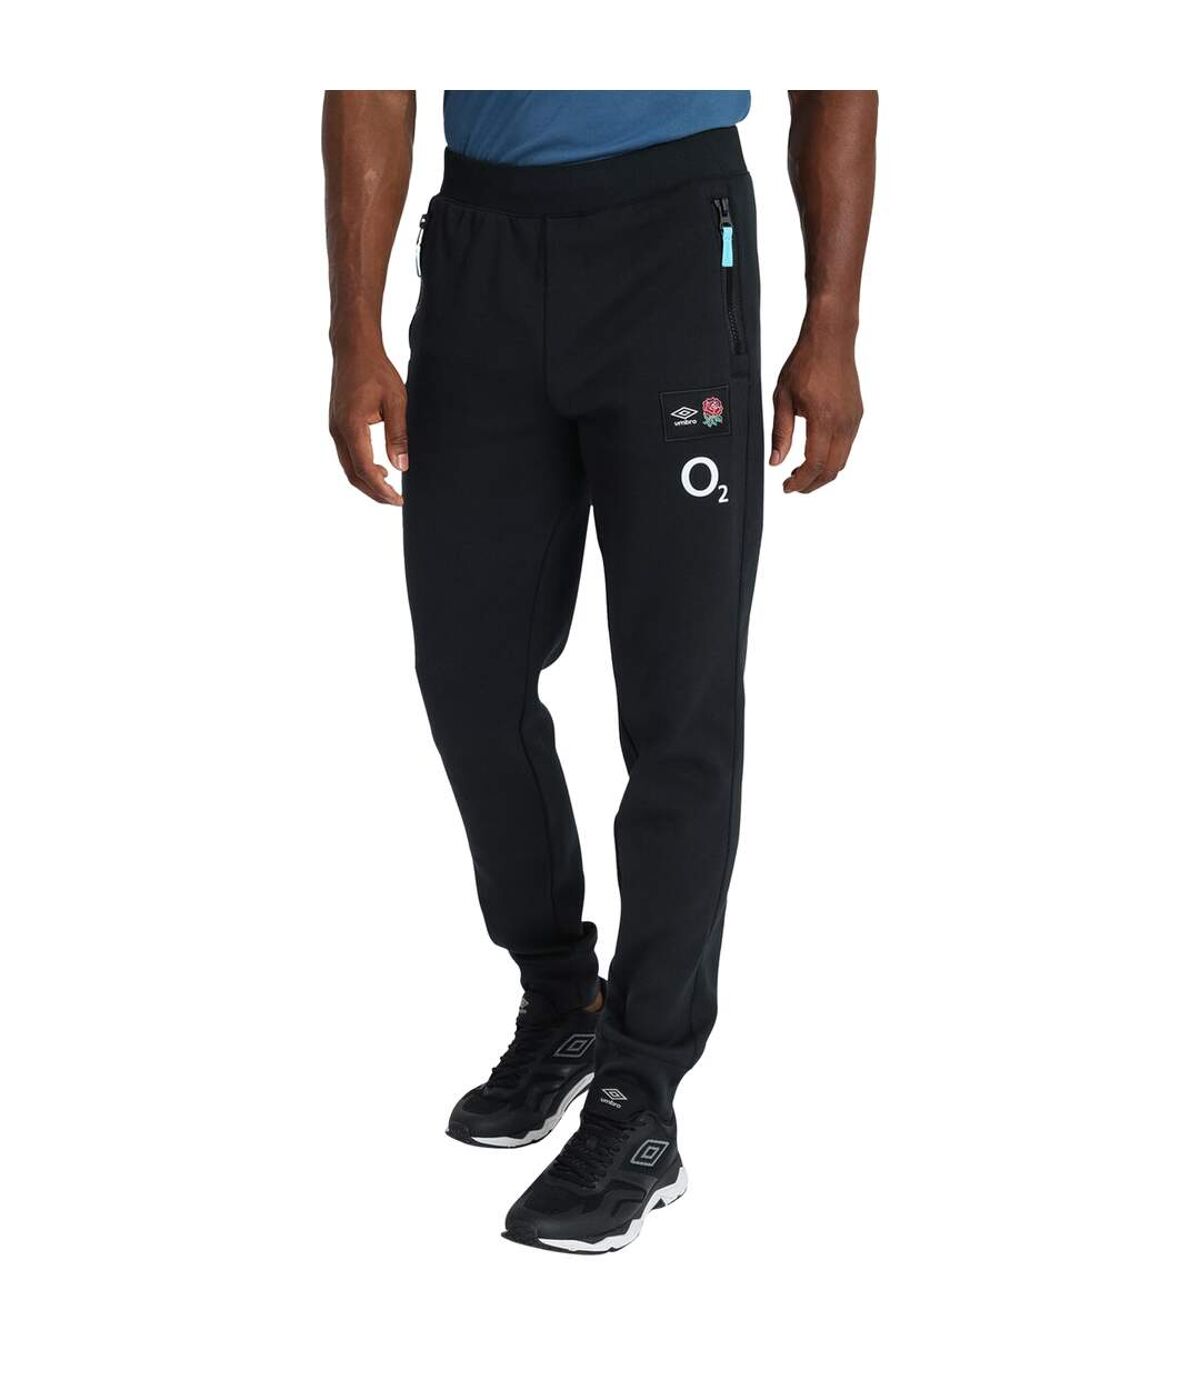 England Rugby Mens 22/23 Umbro Knitted Sweatpants (Black)